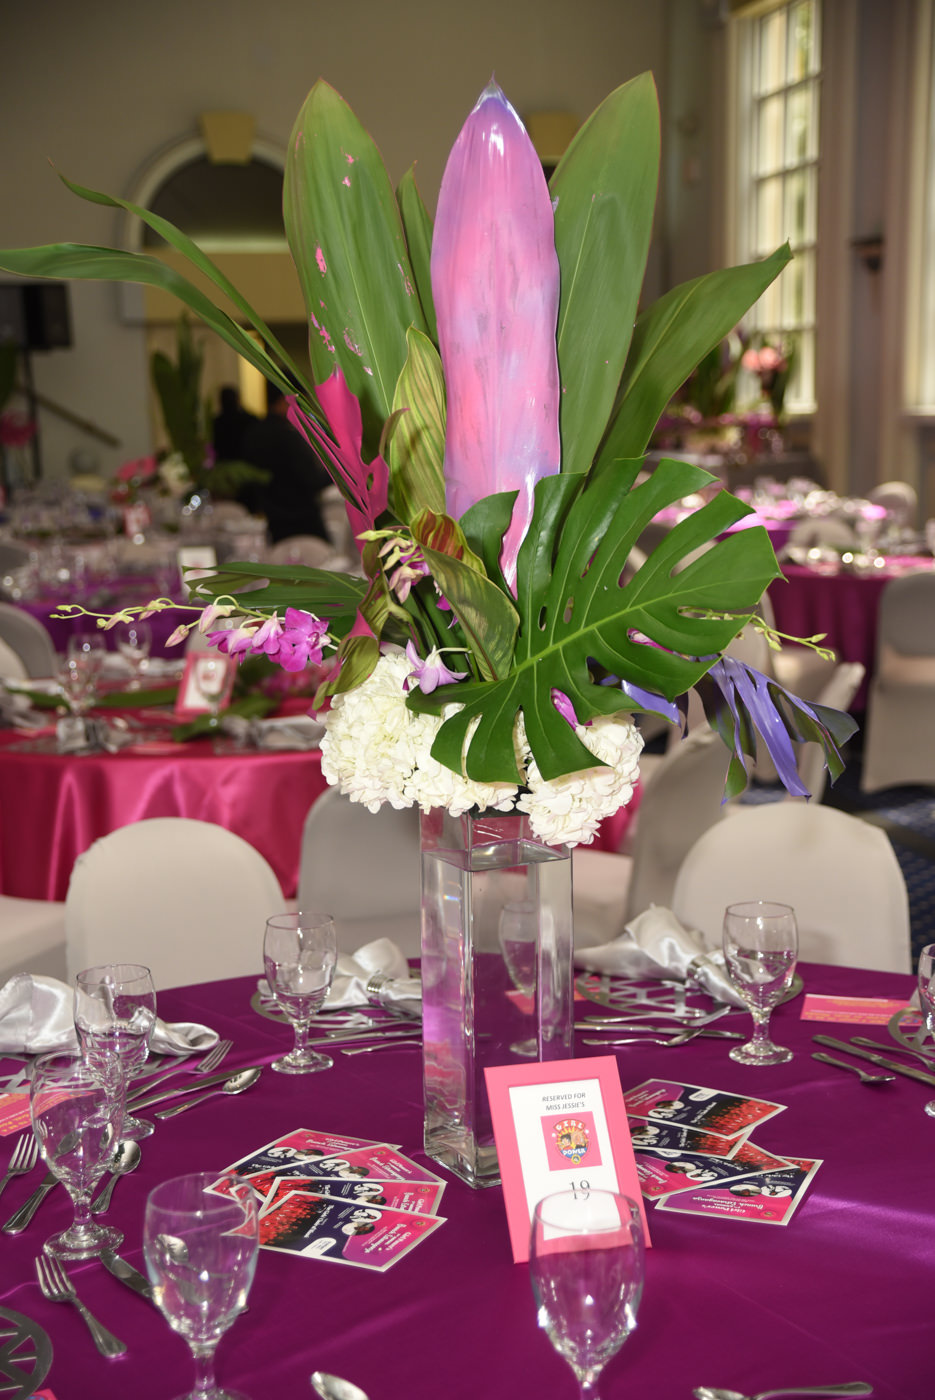 Girl Power Rocks event with pink and green floral arrangement on pink table with white chairs eccessories by ellen www.eccessoriesbyellen.com